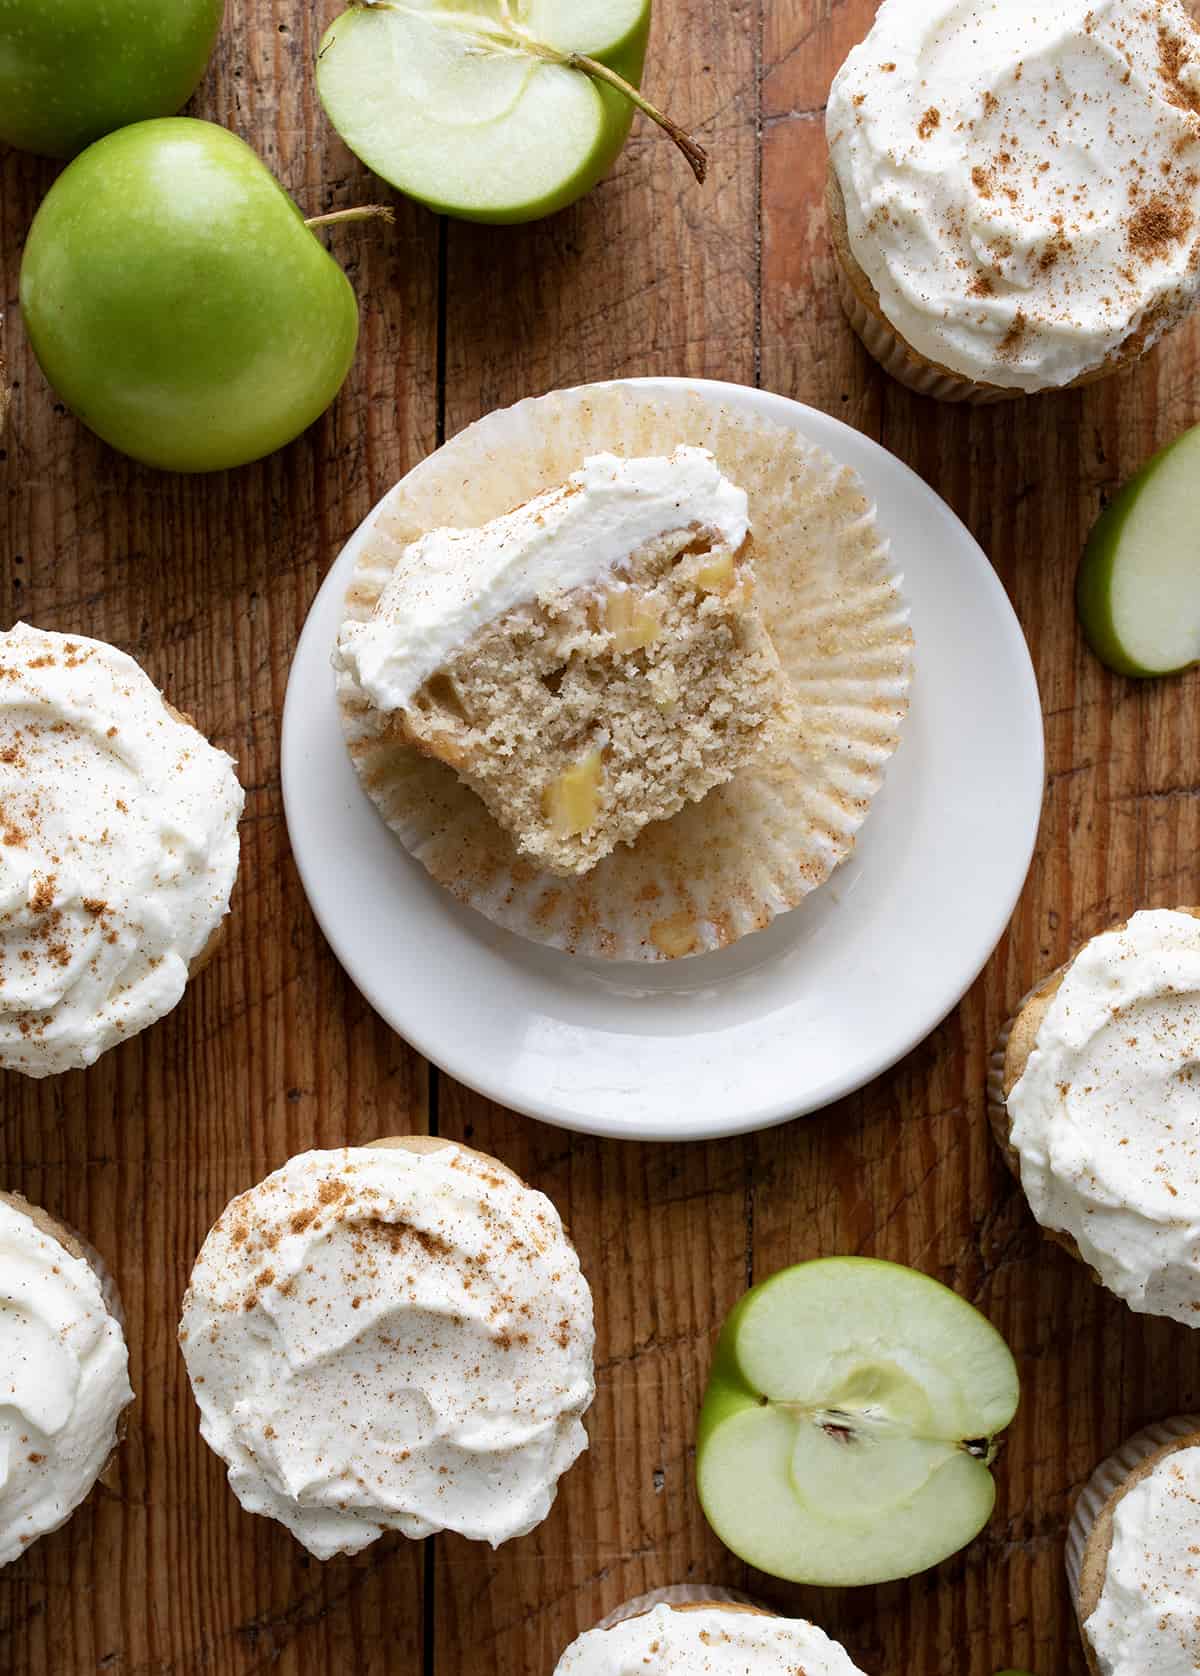 Apple Pie Cupcake Cut in Half on a Plate Surrounded by More Apple Pie Cupcakes and apples from Overhead.